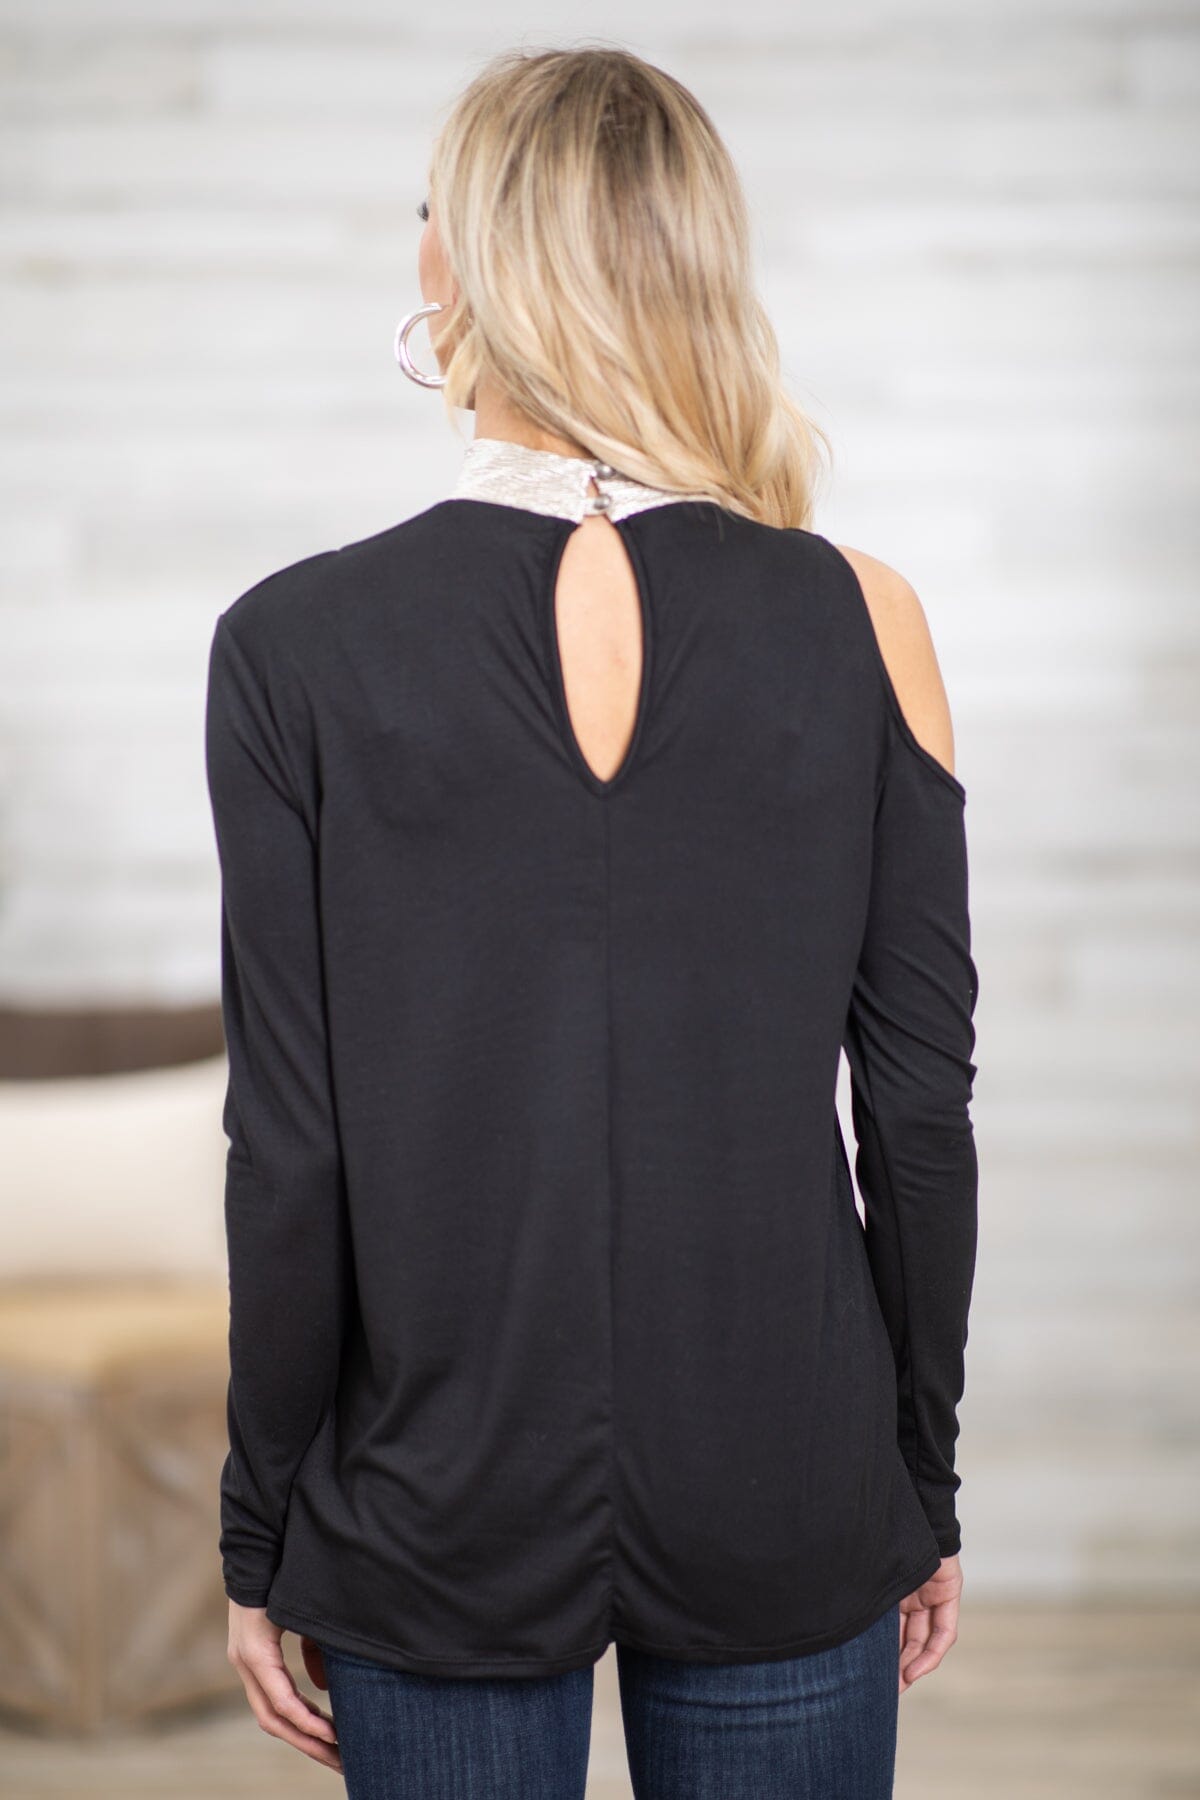 Black and Silver Mock Neck Top With Cutouts · Filly Flair